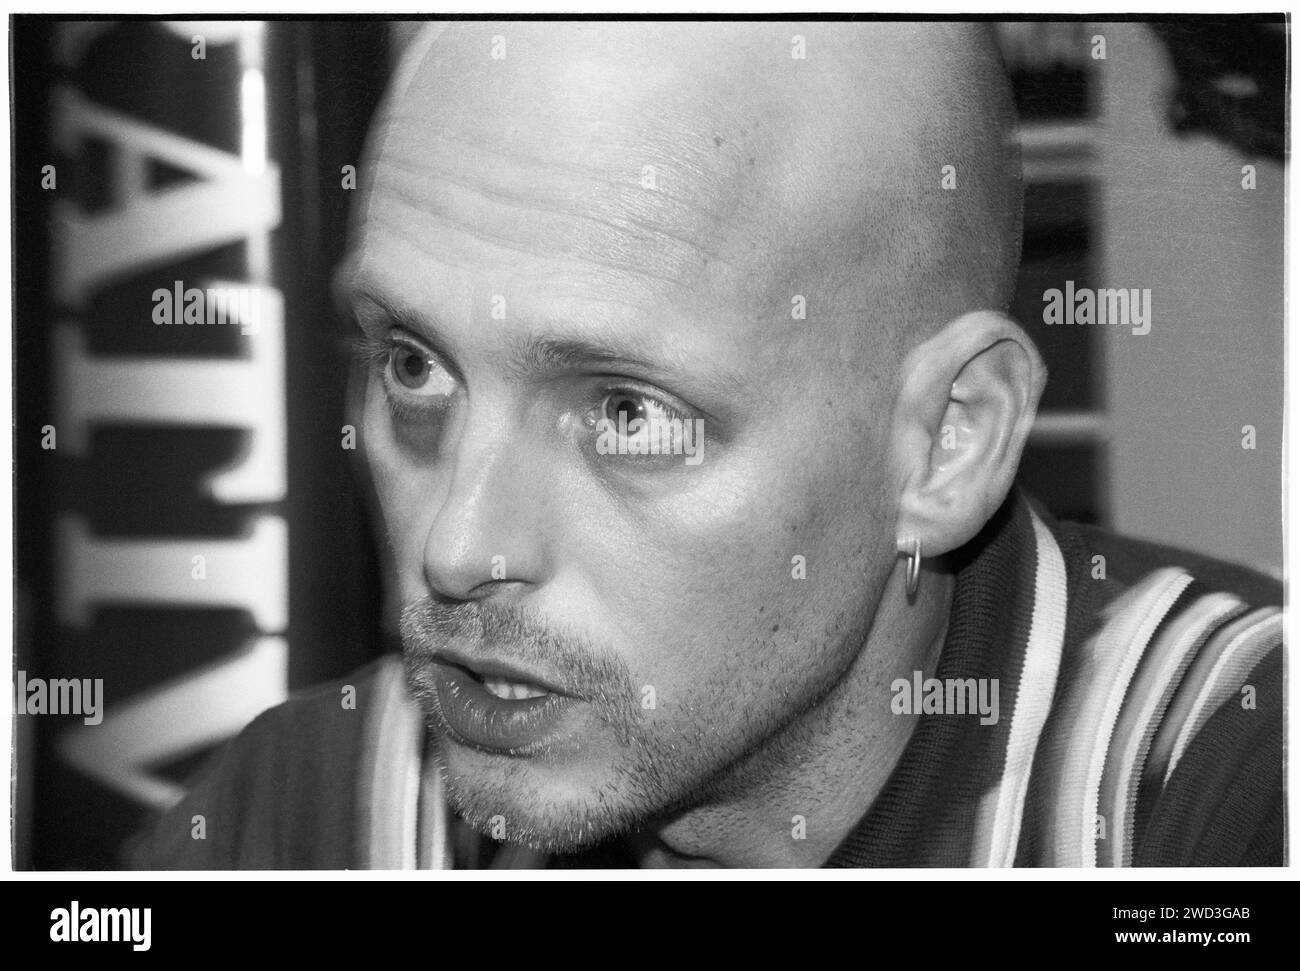 Phil Hartnoll of dance music legends Orbital backstage on a Megadog Tour at Cardiff University in Cardiff, Wales, UK on 4 October, 1993. Photo: Rob Watkins. INFO: Orbital, a pioneering electronic music duo from England formed in 1989, played a crucial role in the development of ambient and techno genres. Brothers Paul and Phil Hartnoll created innovative, atmospheric, and danceable tracks that have left a lasting impact on electronic music. Stock Photo